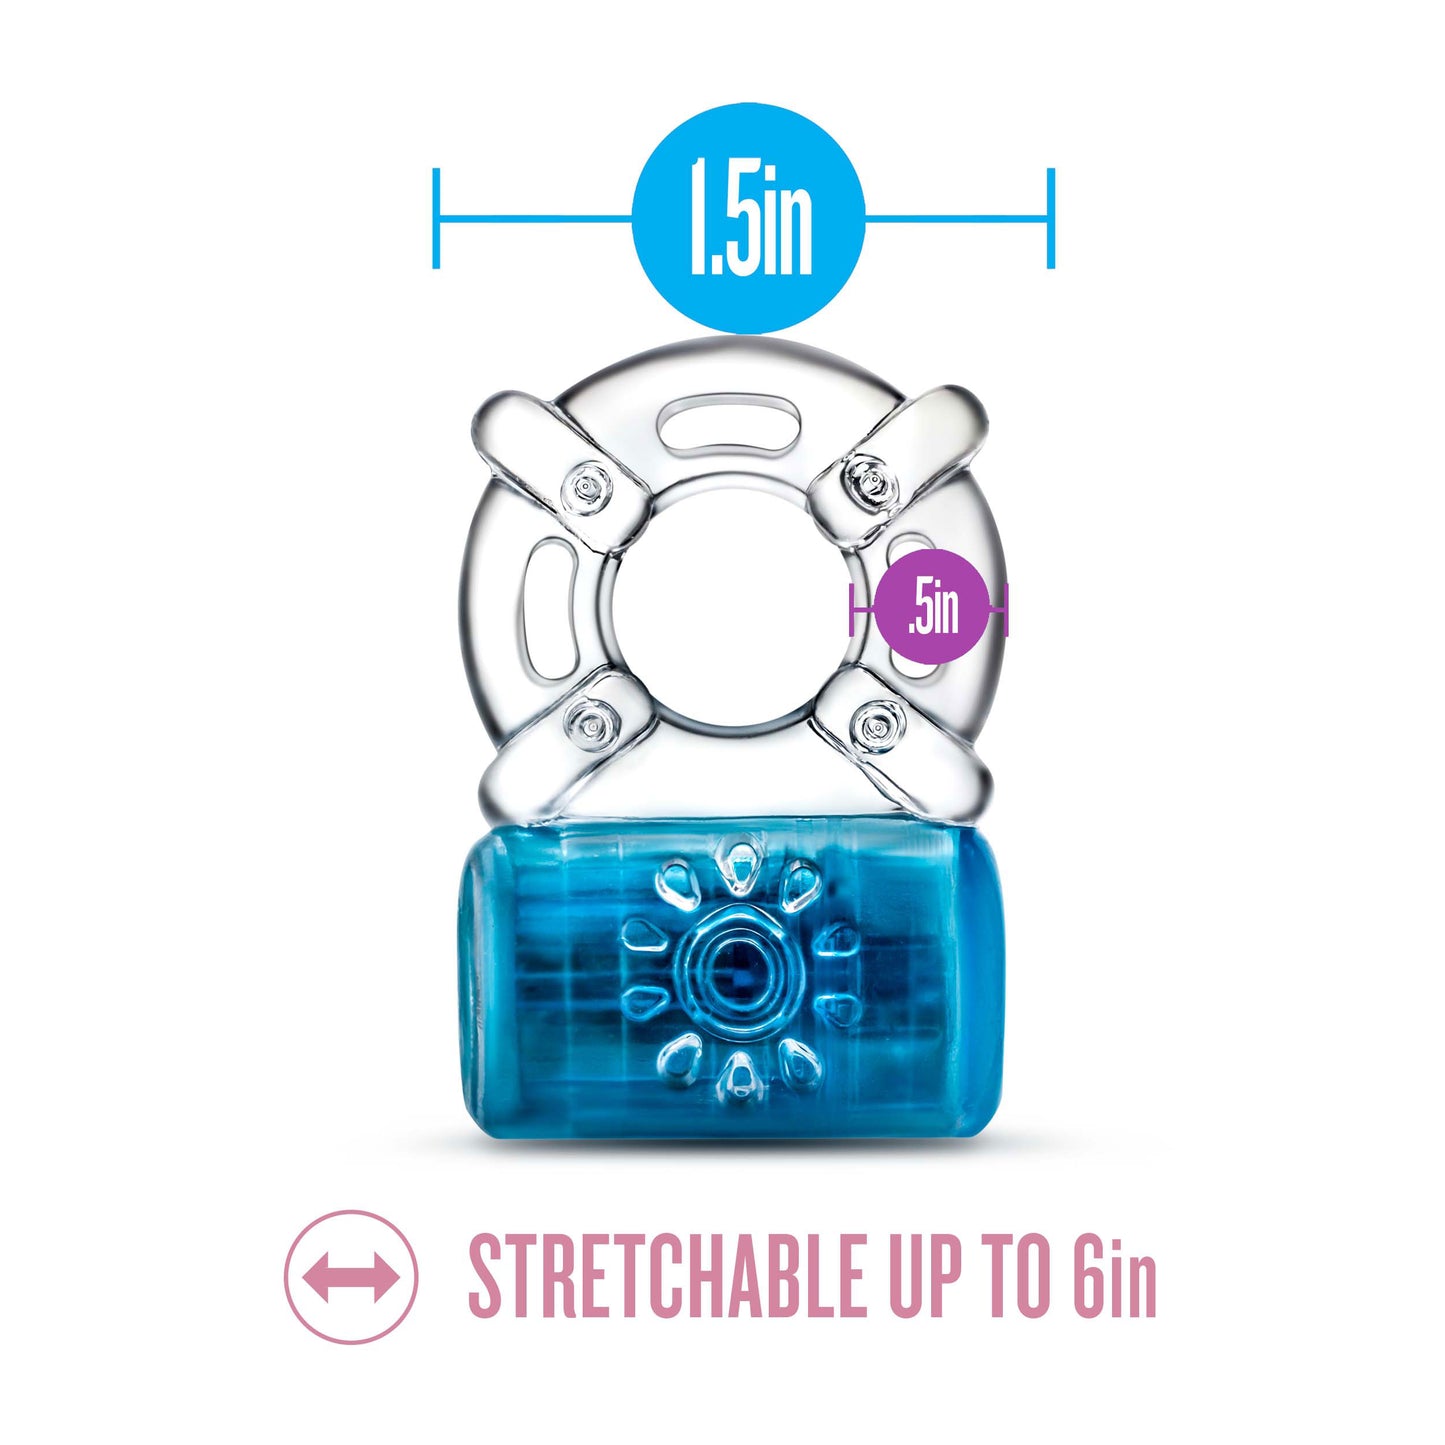 Play With Me - One Night Stand Vibrating C-Ring -  Blue